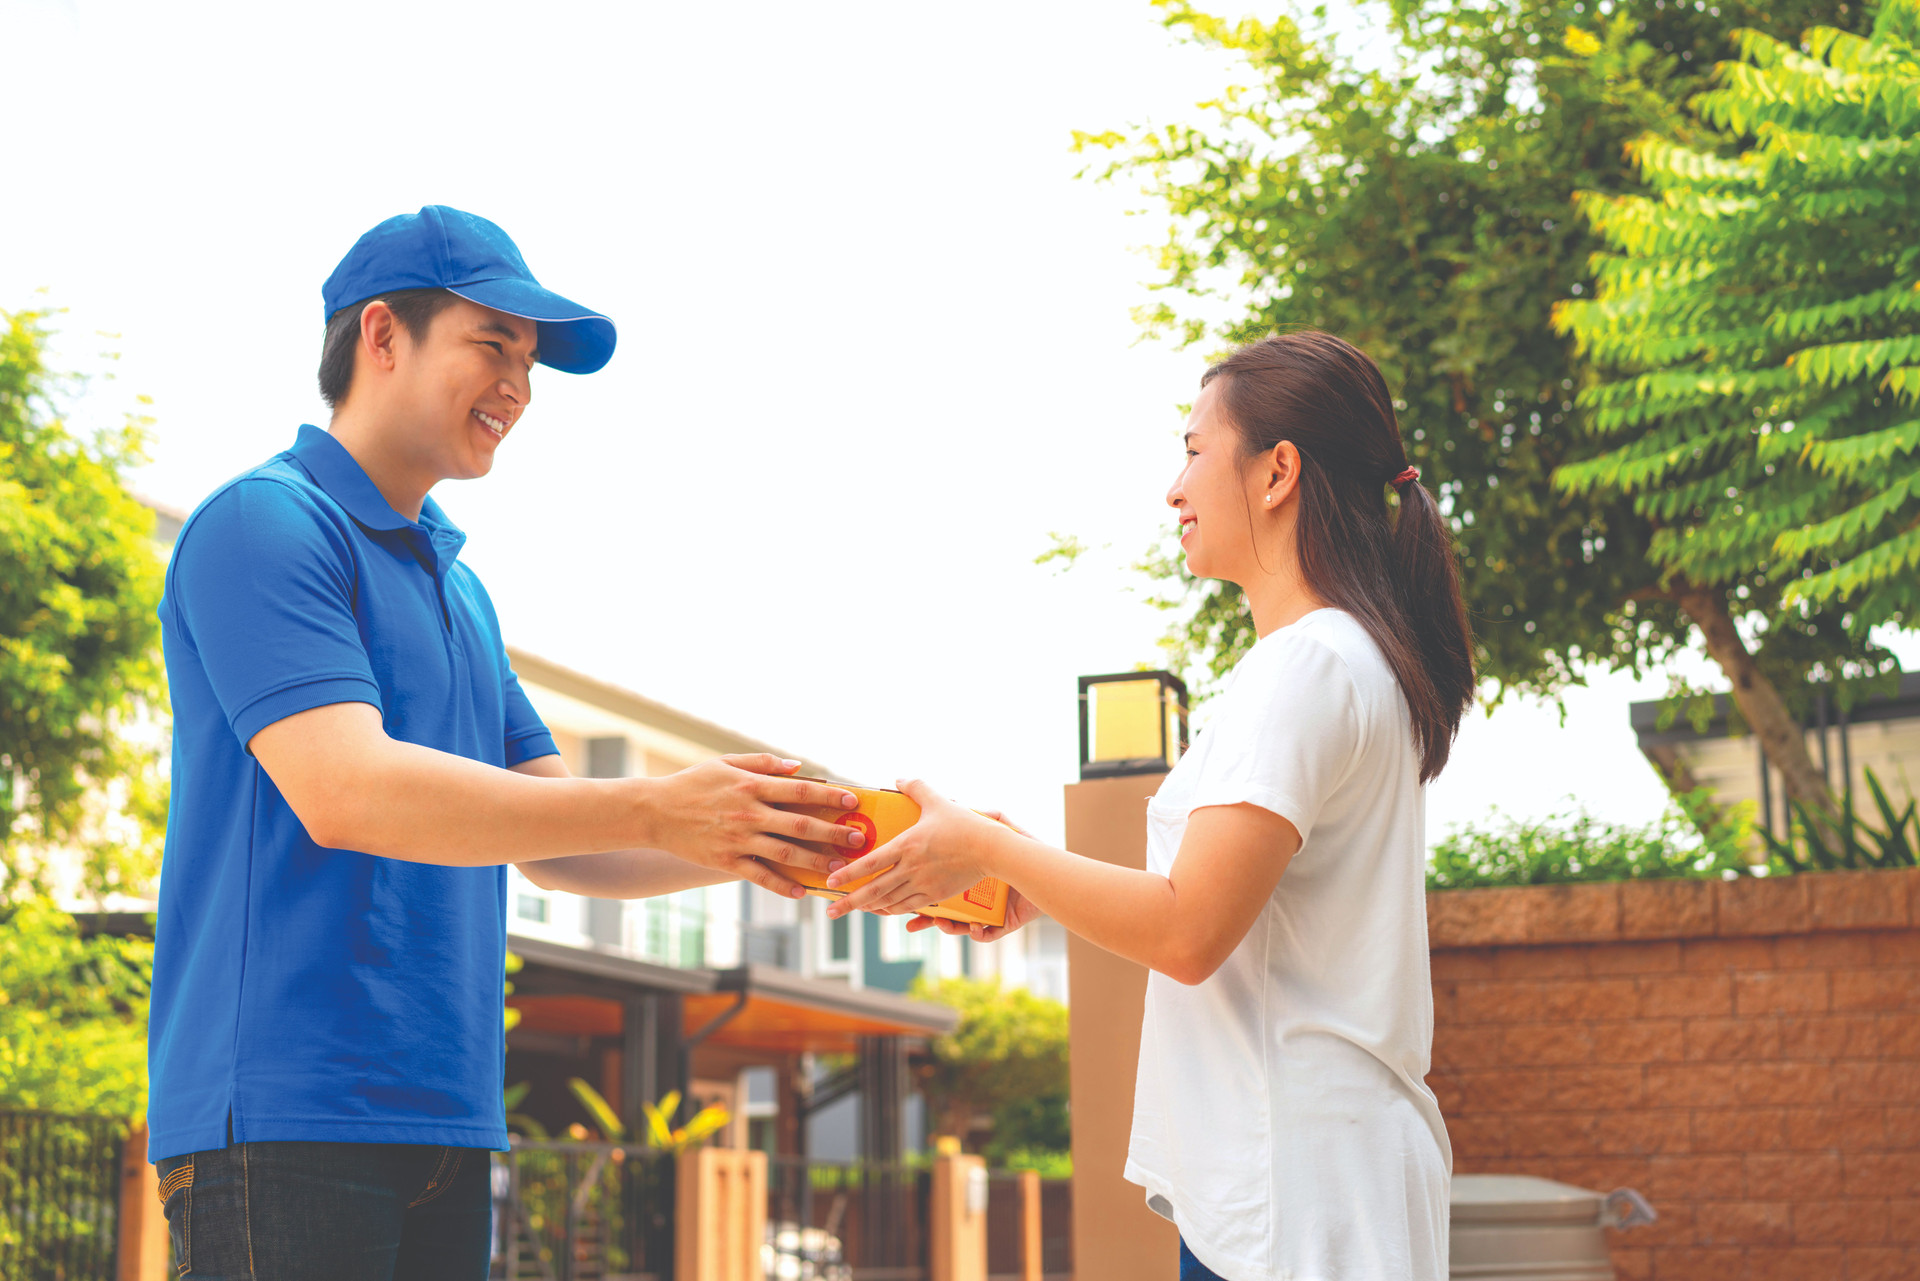 asian-delivery-young-man-blue-uniform-giving-box-customer-compressed.jpeg